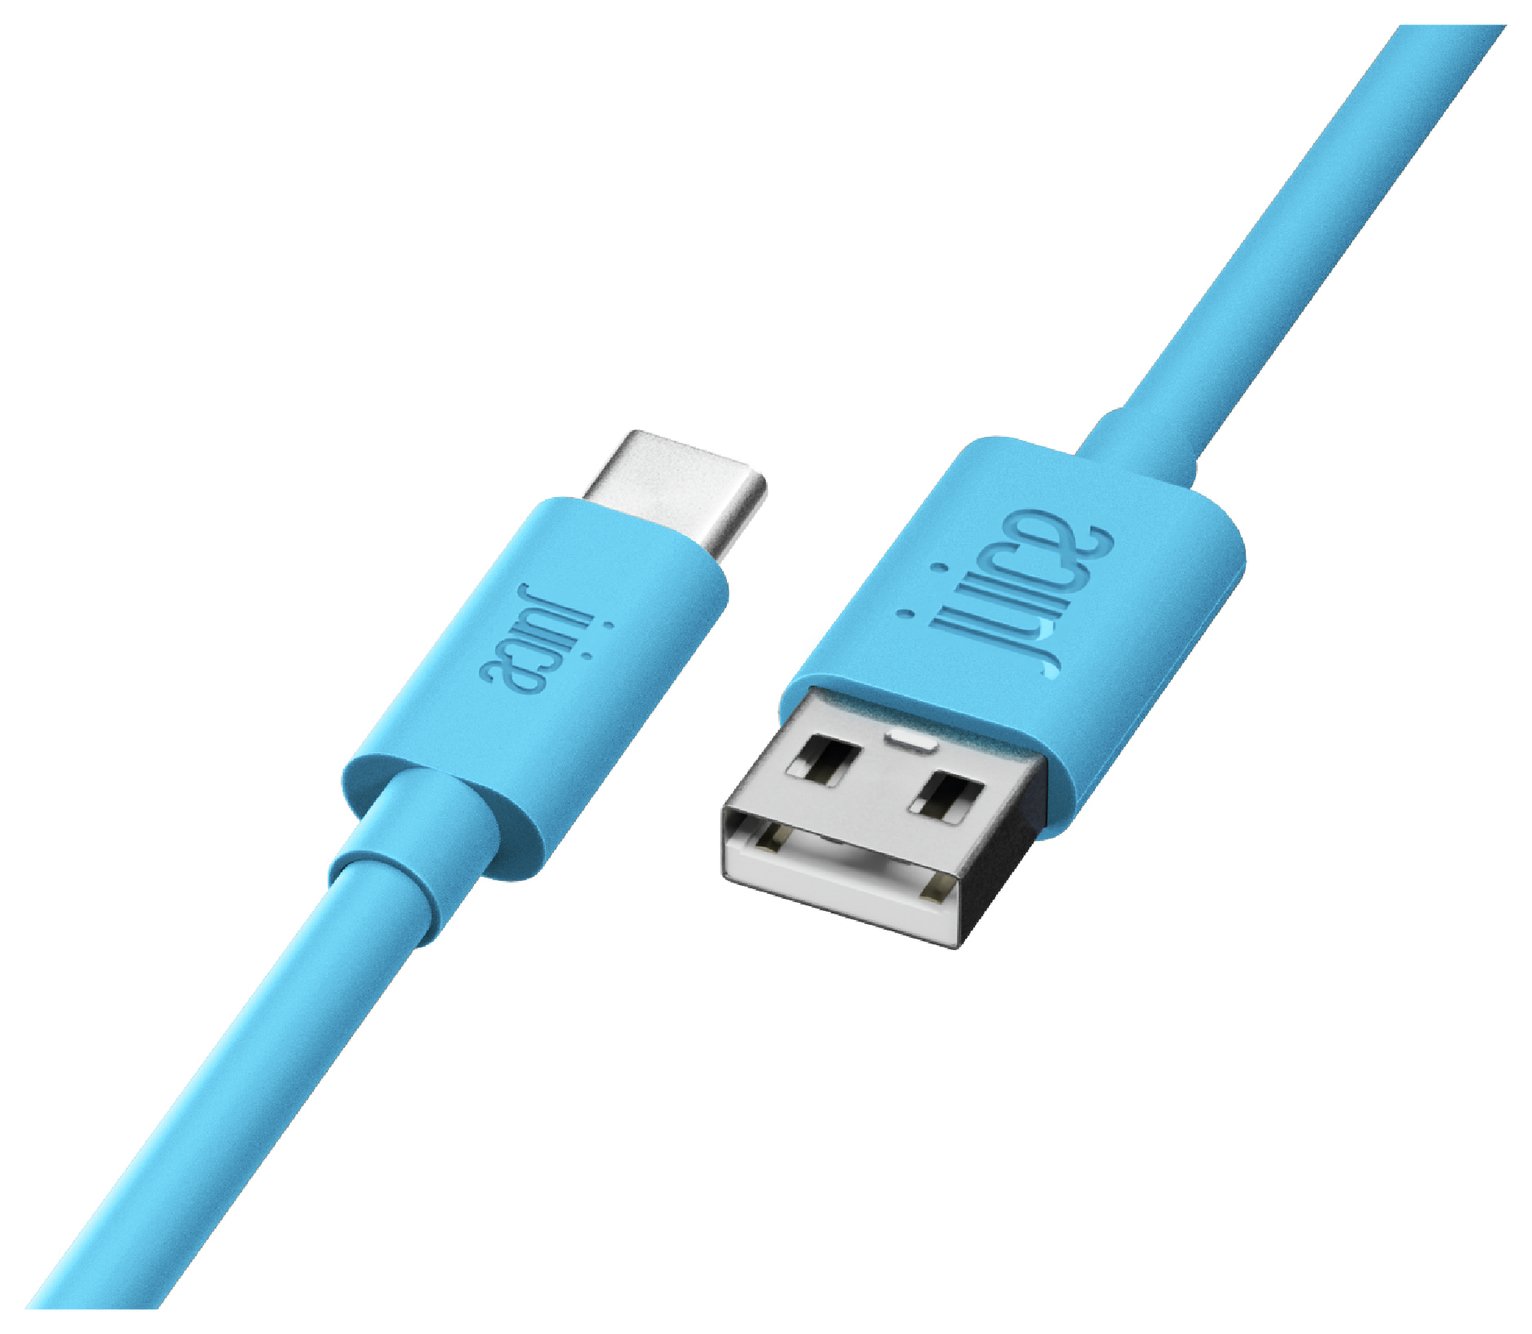 Juice USB Type A to USB Type C 2m Charging Cable - Aqua